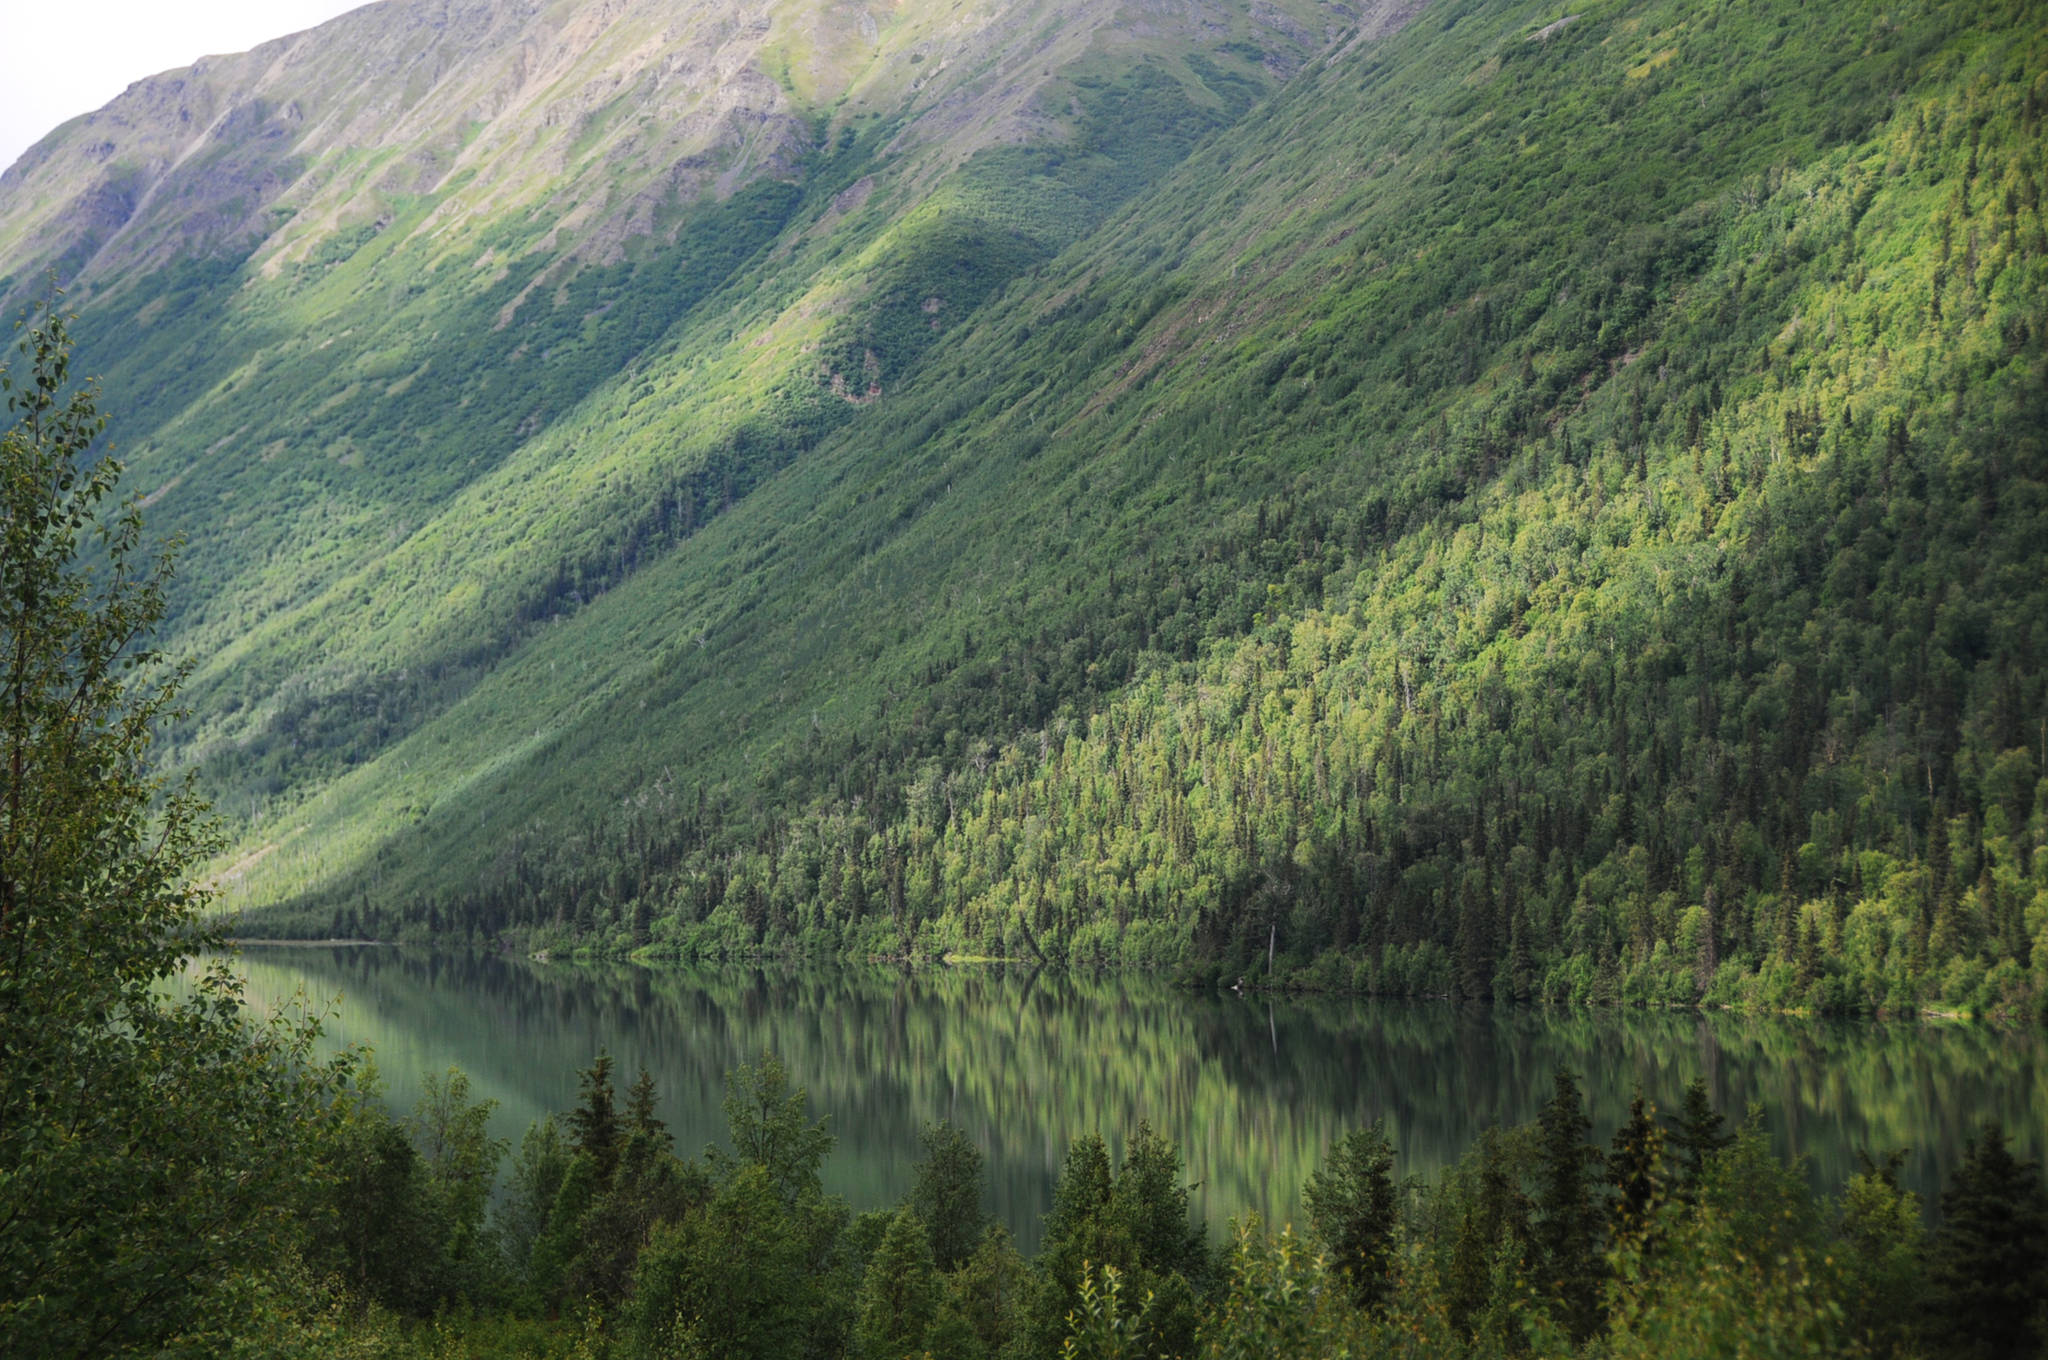 This June 2016 photo shows Lower Russian Lake on the Russian Lakes Trail near Cooper Landing, Alaska. (Clarion file photo)